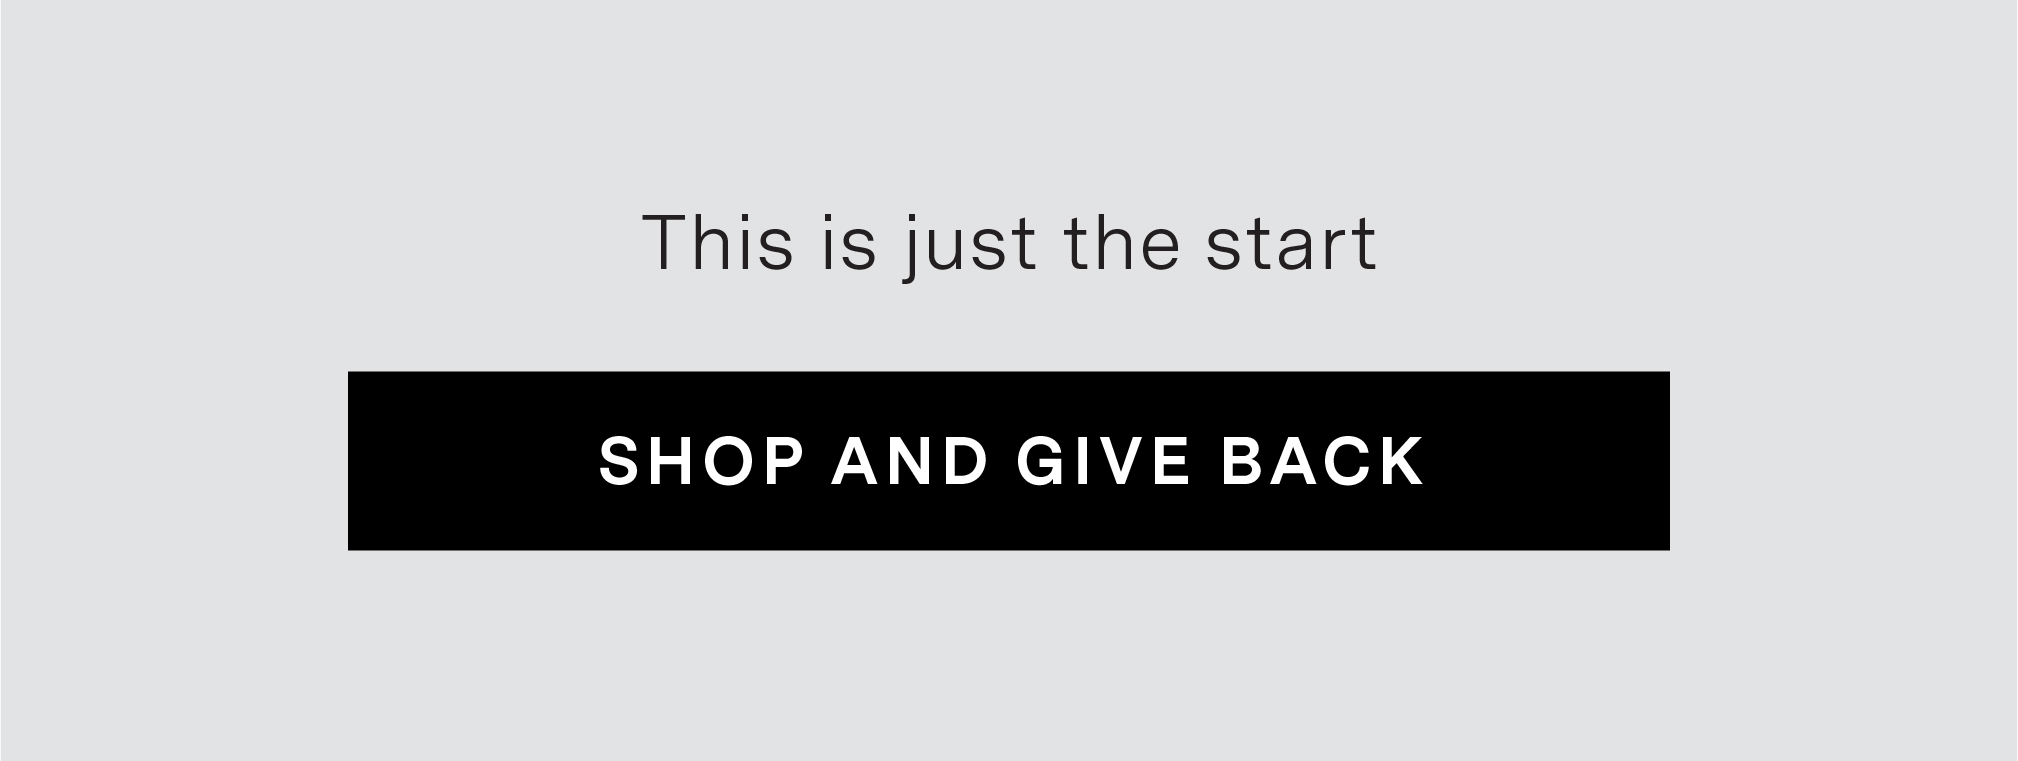 This is just the start. Shop and give back.